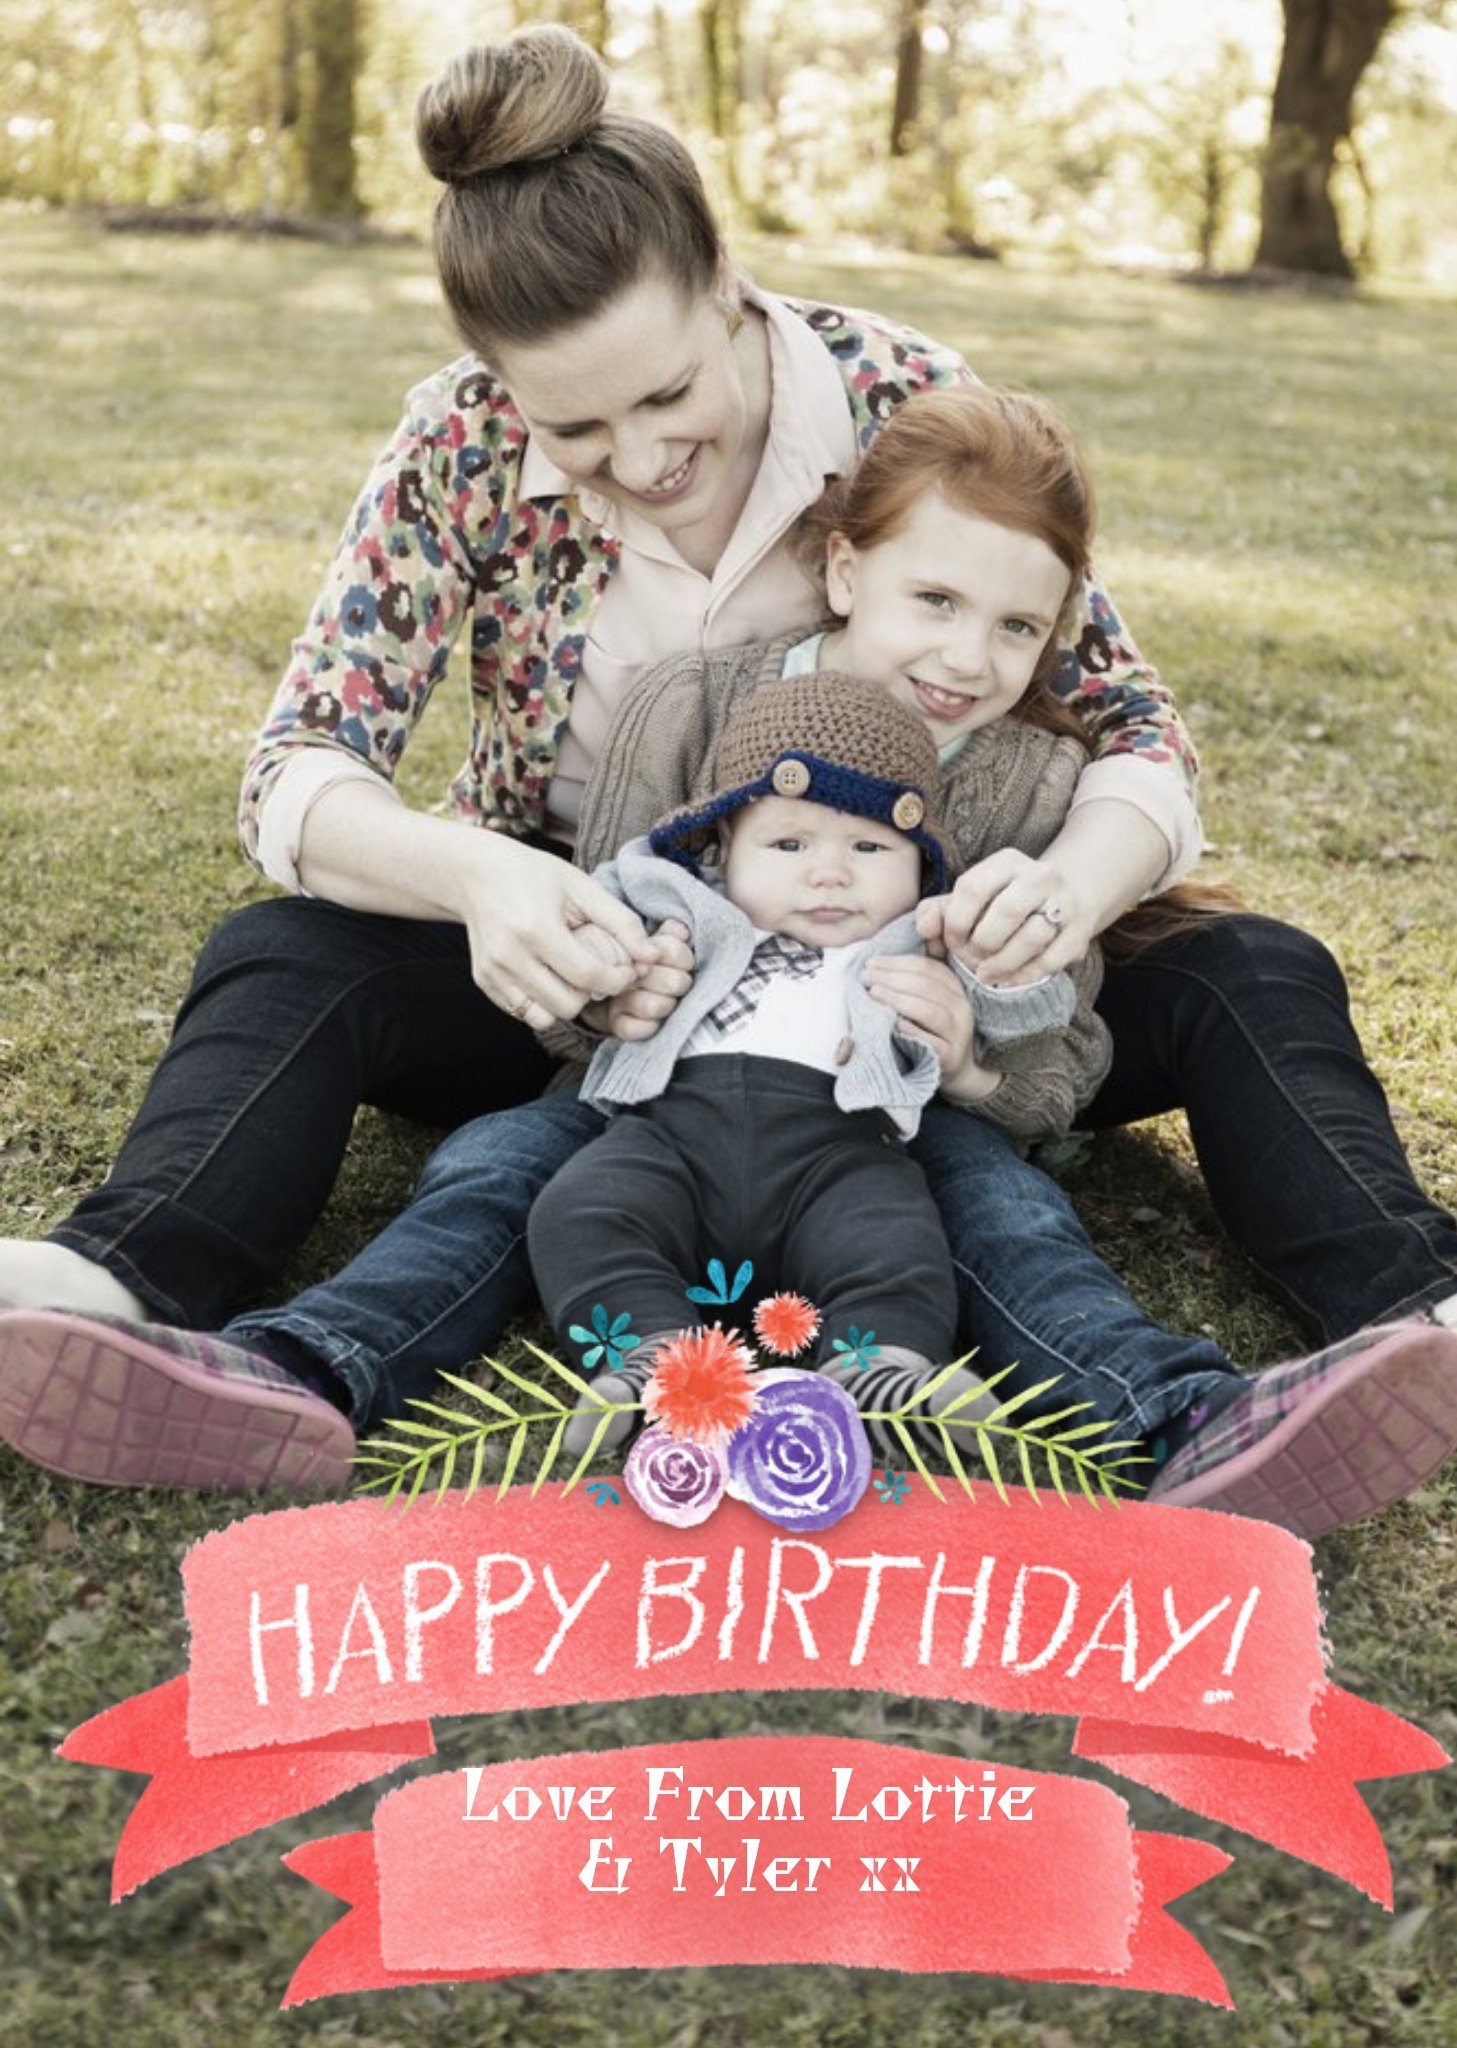 Moonpig Coral Birthday Banner With Floral Details Personalised Photo Upload Birthday Card Ecard